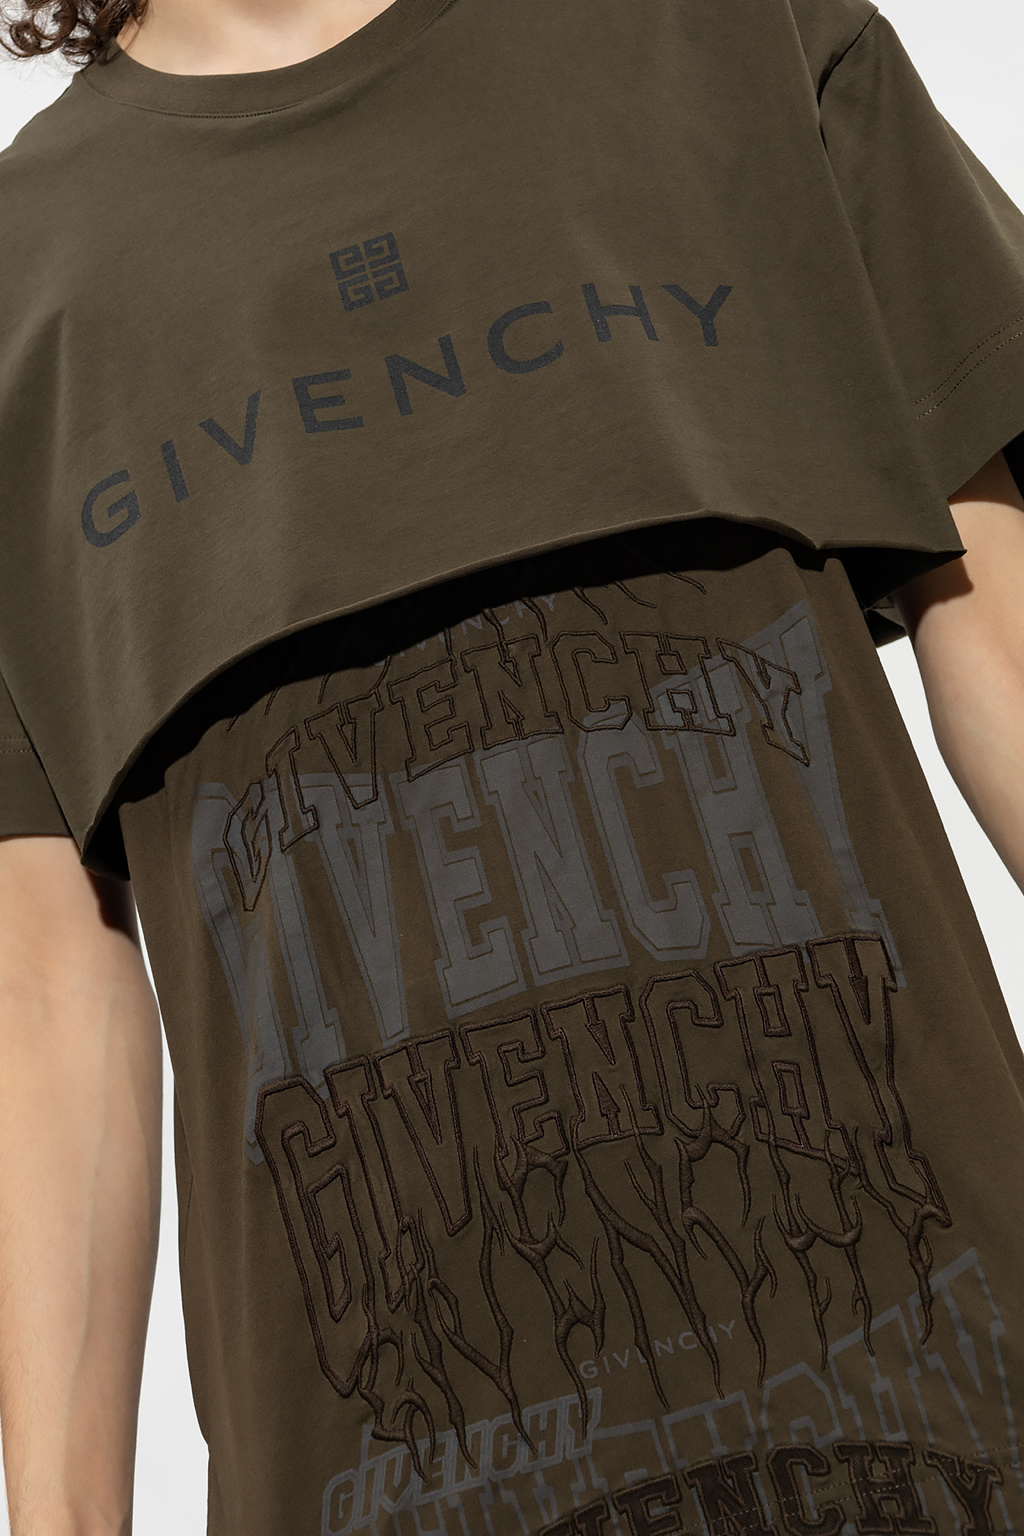 Marcelo Burlon or Givenchy? does it matter? those tshirts are just cool!!